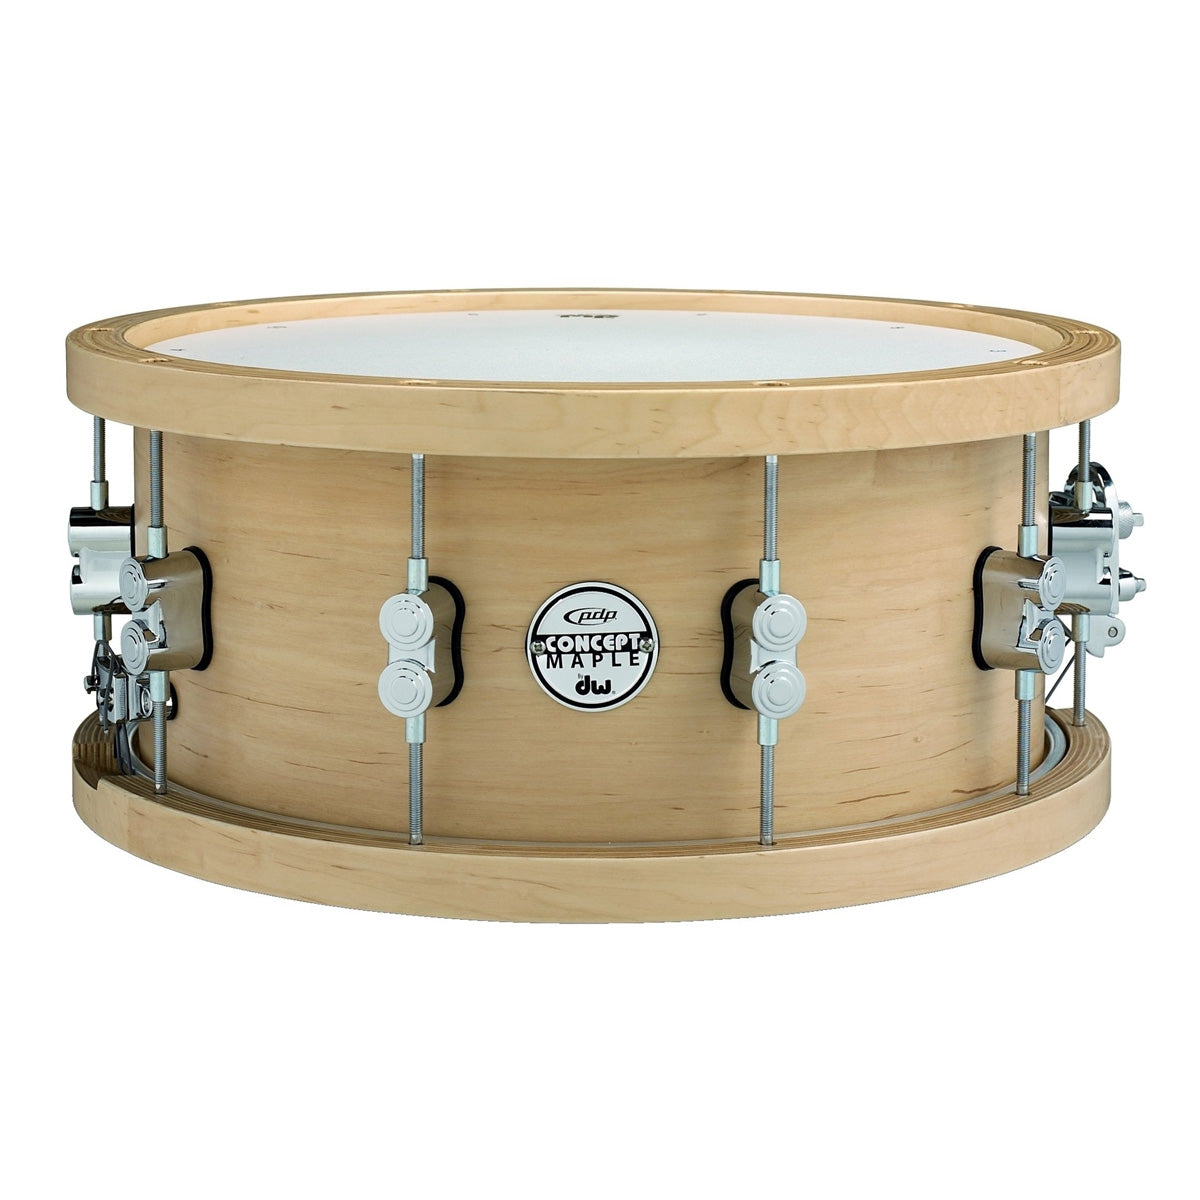 PDP by DW Concept 14"x6.5" 20ply Thick Maple Snare Drum with Wood Hoops in Natural